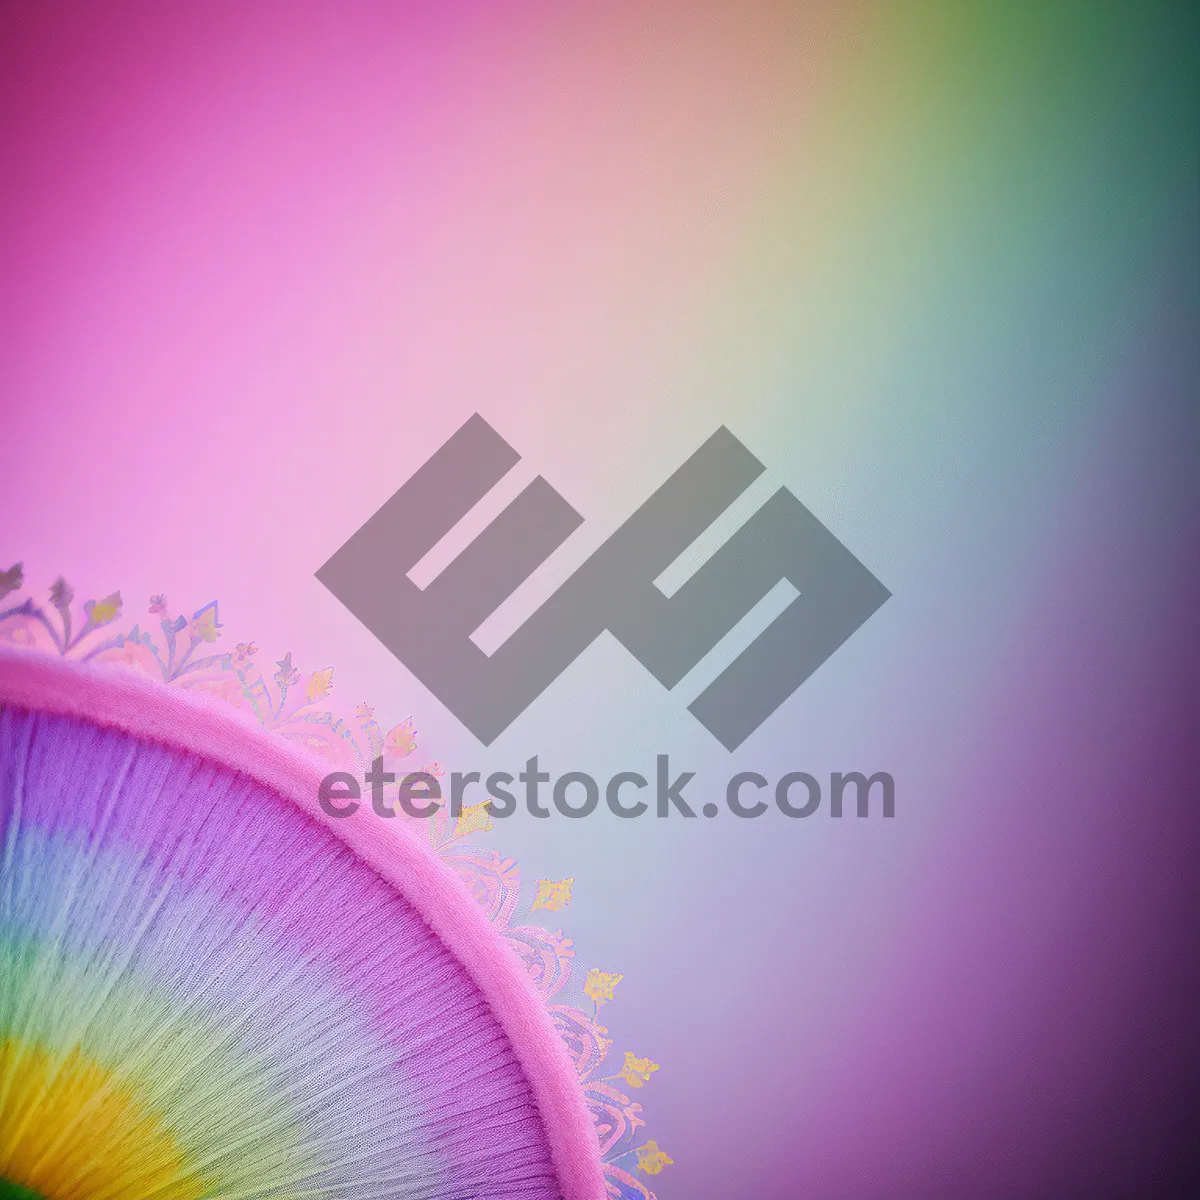 Picture of Hippie Shiny Fractal Art - Bright Pink Graphic Design